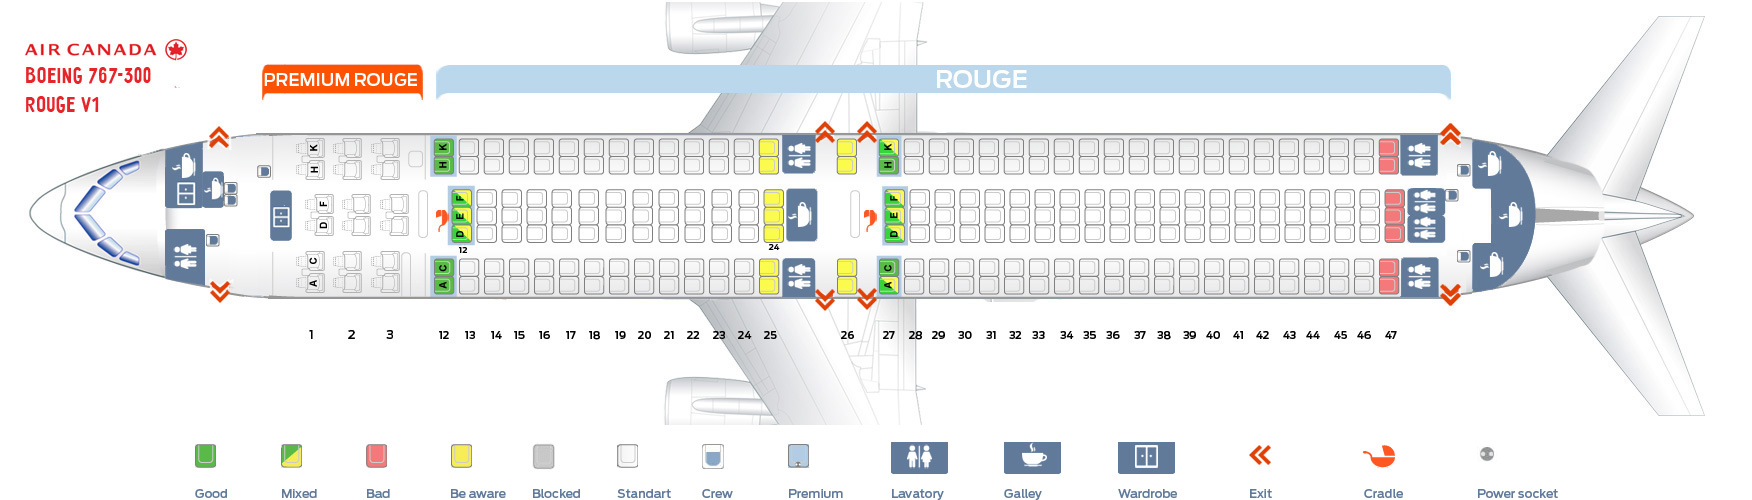 First Cabin Confuguration Seat Map and Seating Chart Boeing 767 300ER Air Canada Rouge